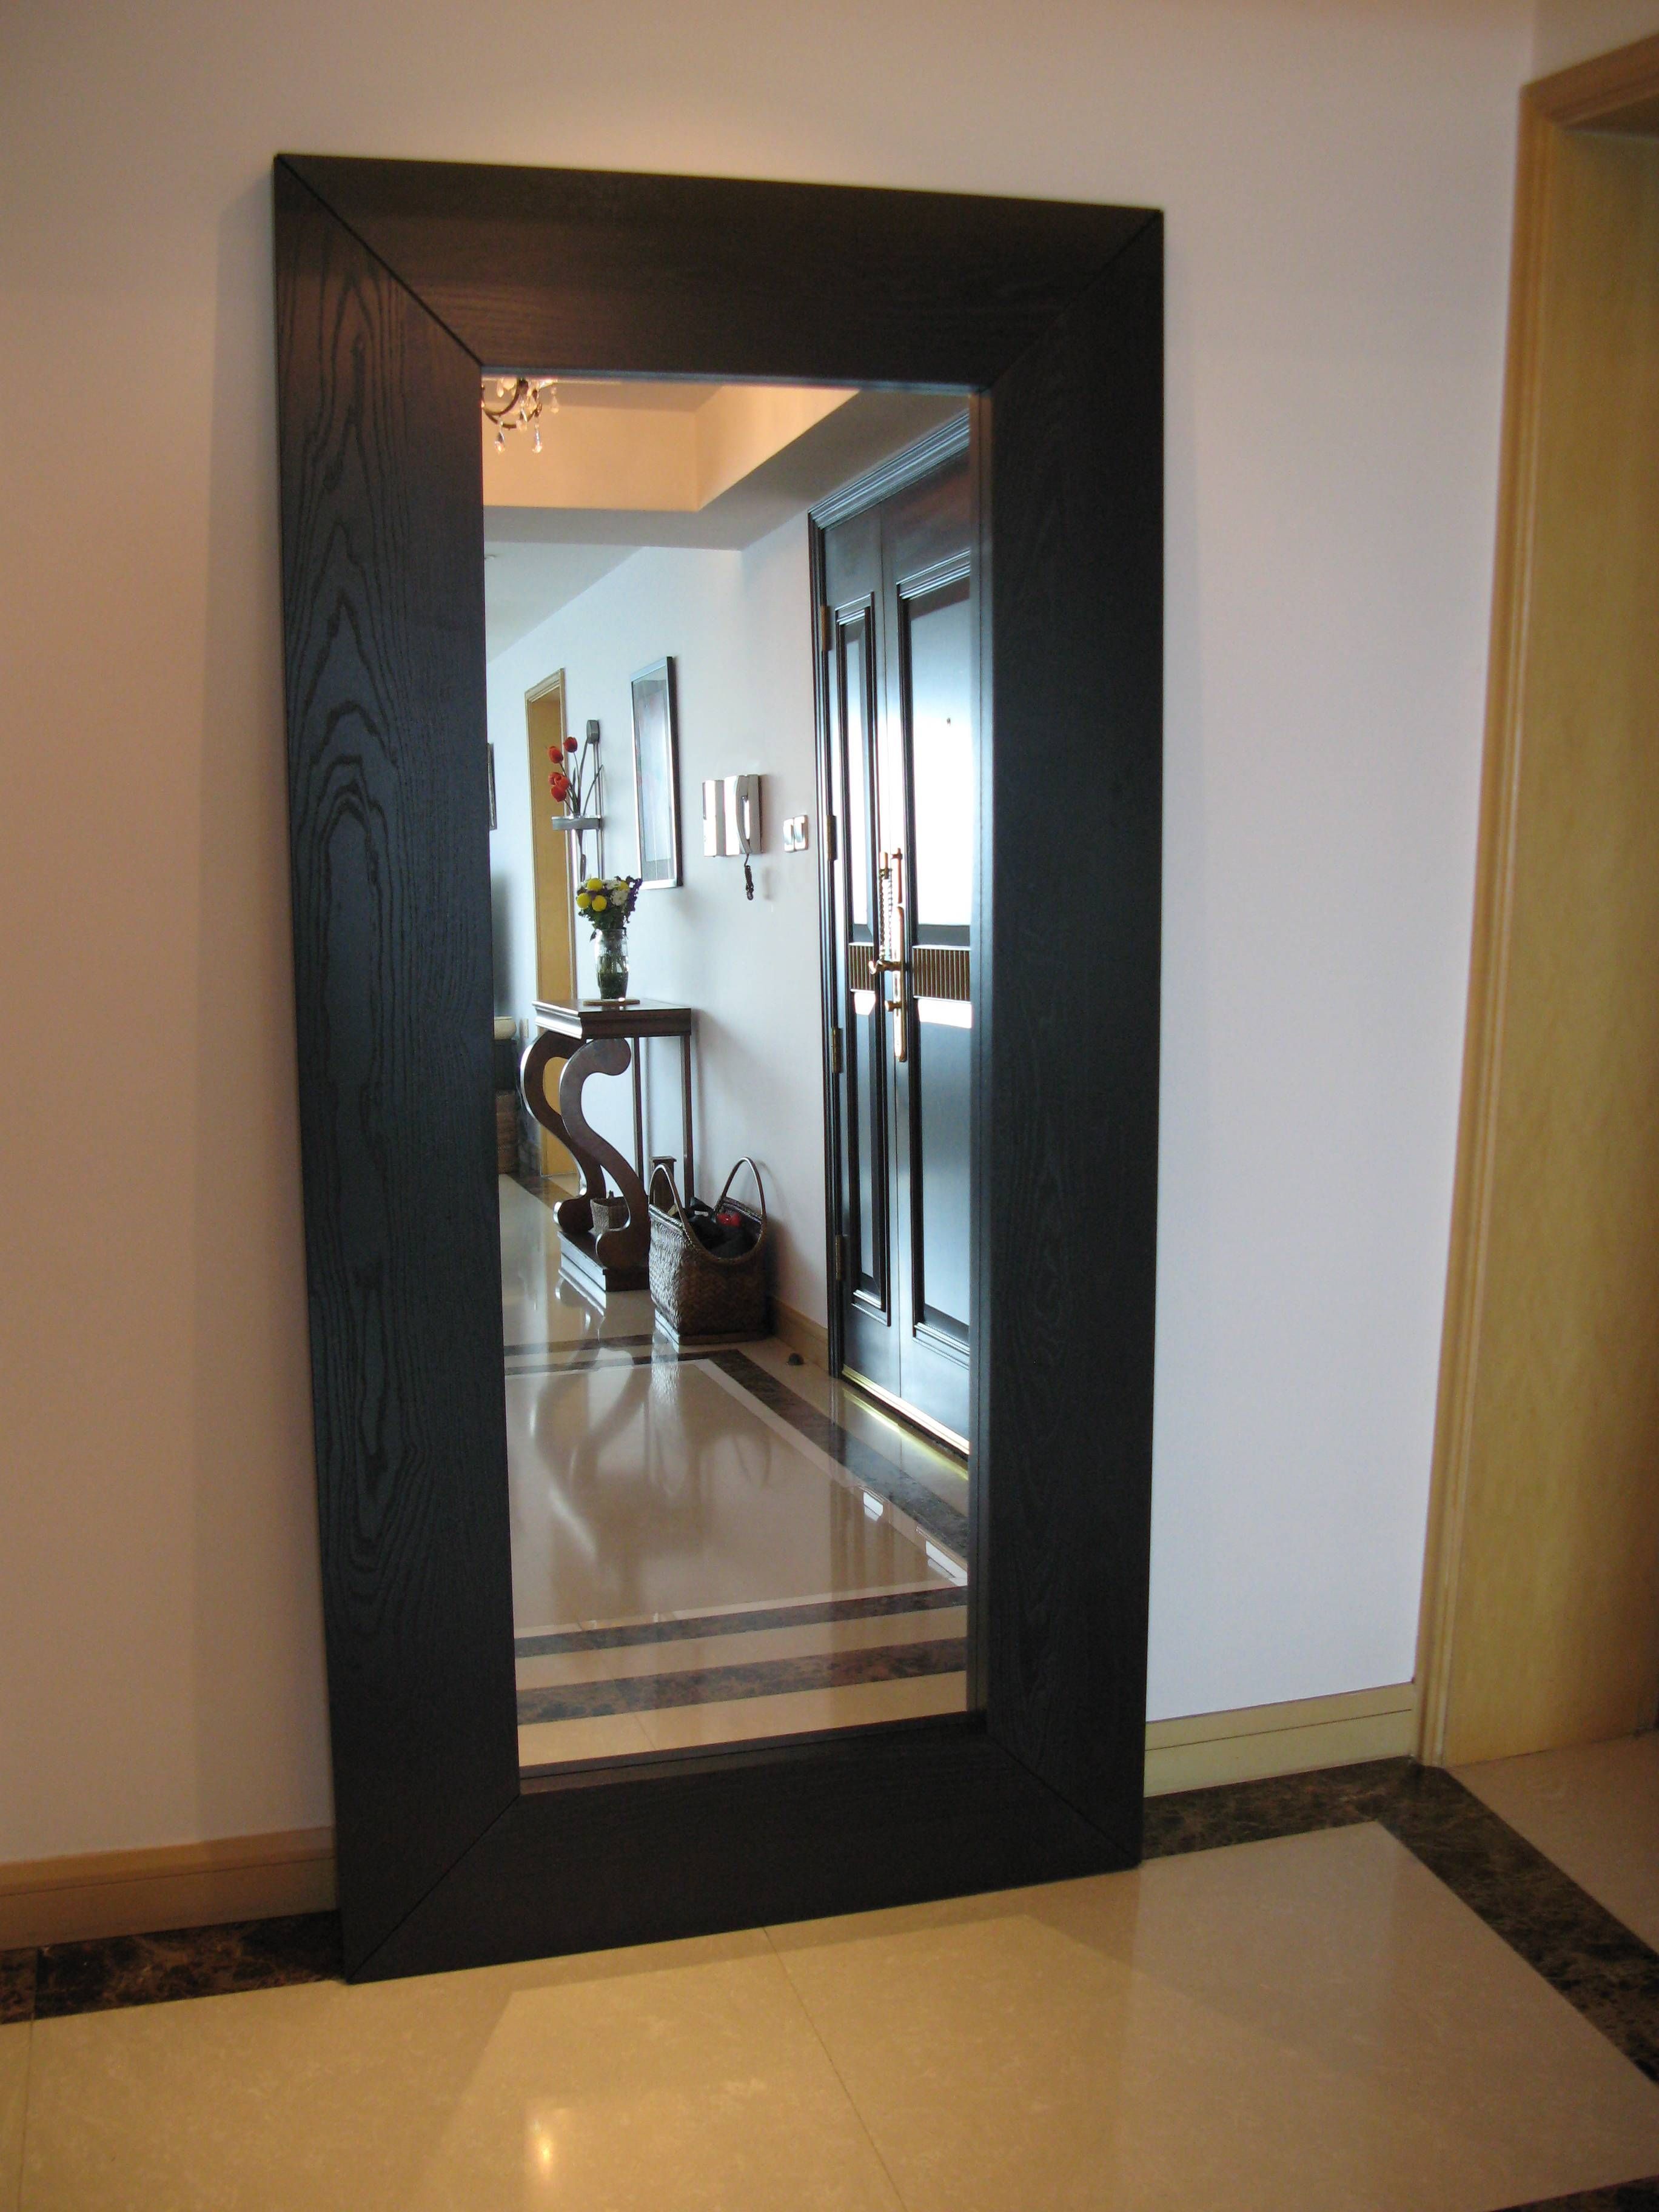 Photos Hgtv Decorative Mirror Accentuates Framed Artwork Iranews With Regard To Huge Full Length Mirrors (View 2 of 25)